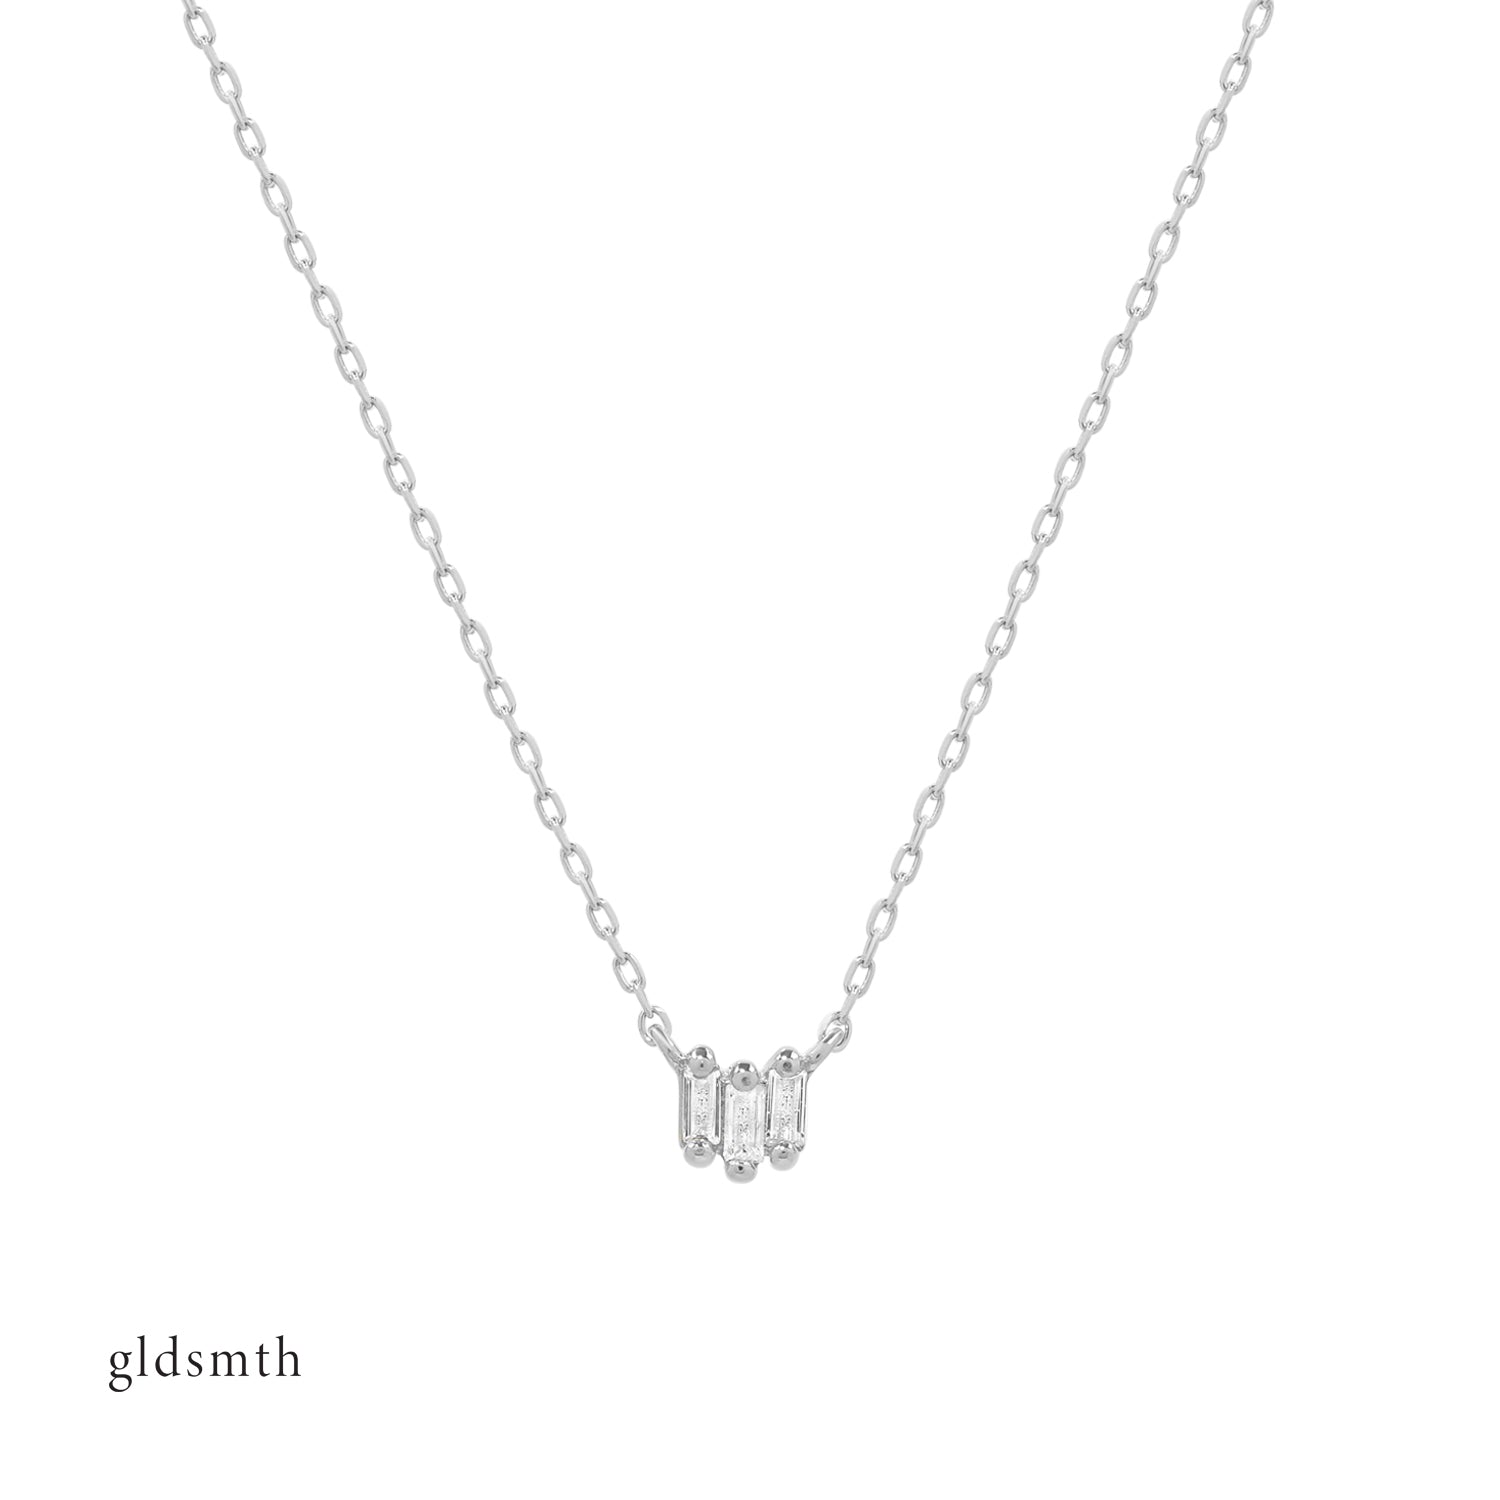 Elegant and fine necklace. Handcrafted 14k solid white gold necklace with white topazes